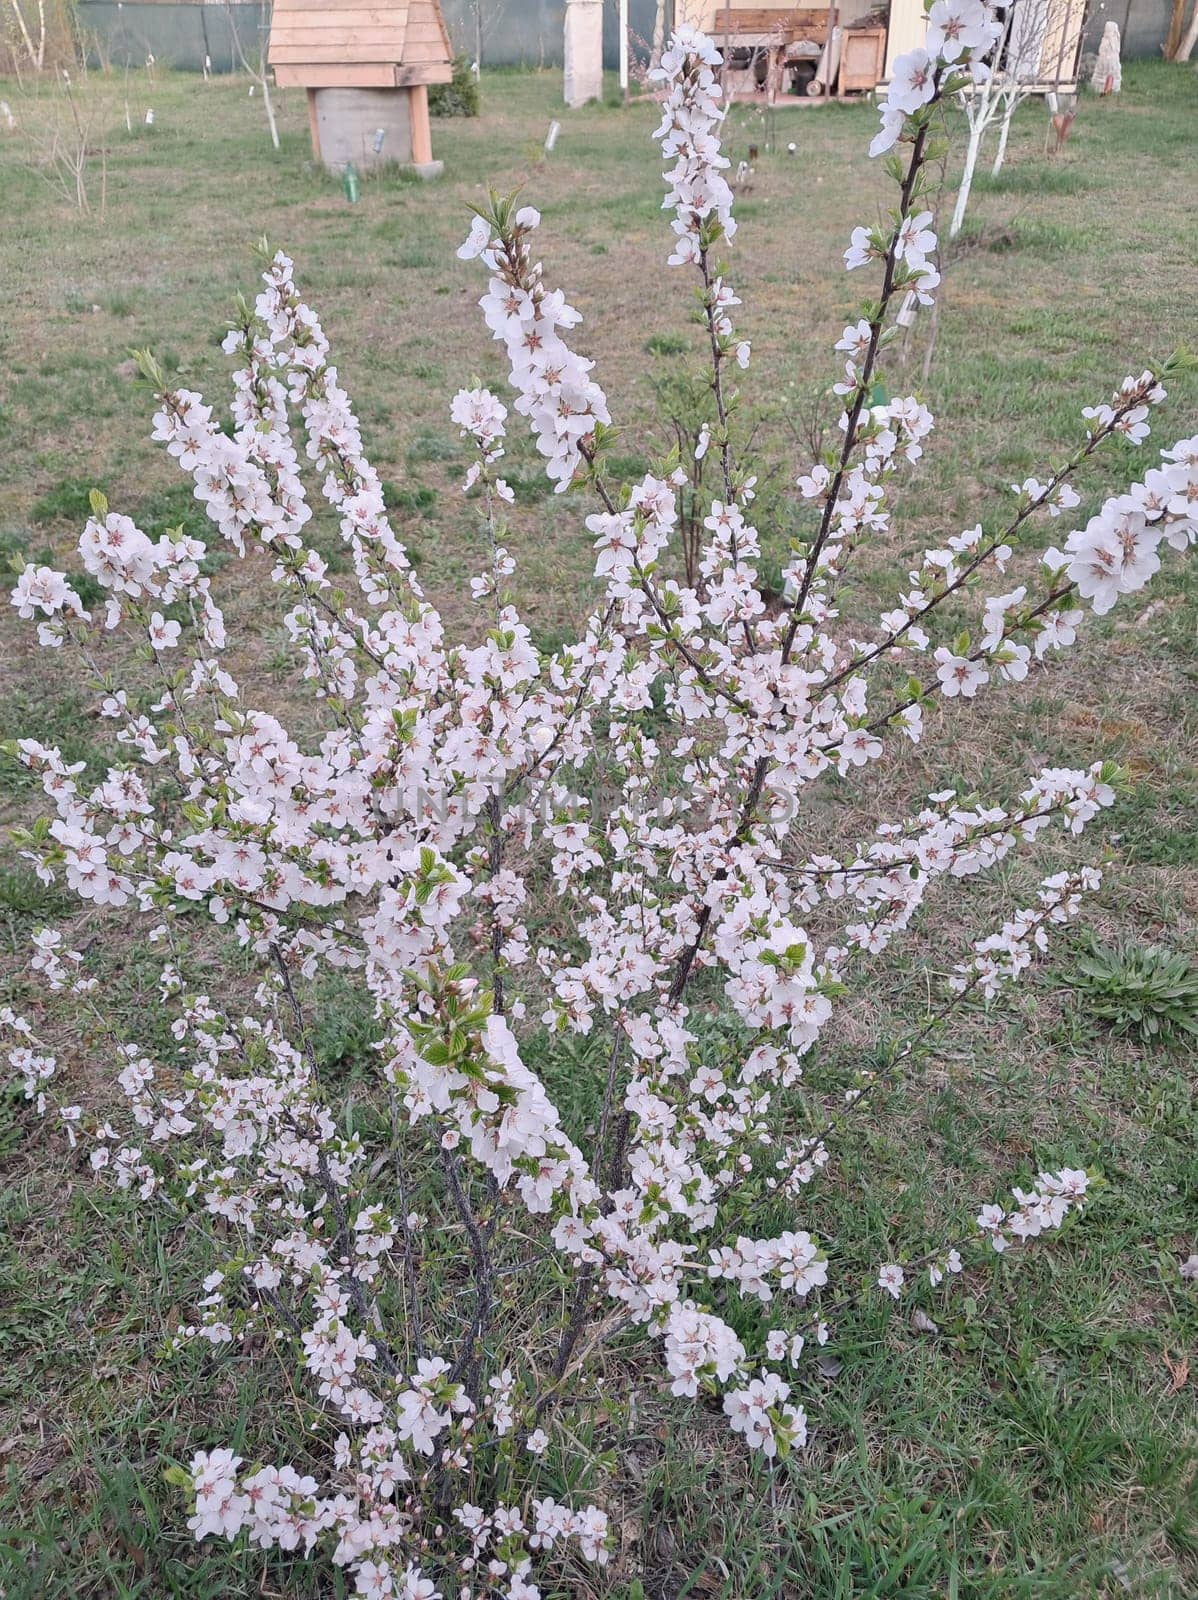 Fruit trees blossomed in a the garden in spring